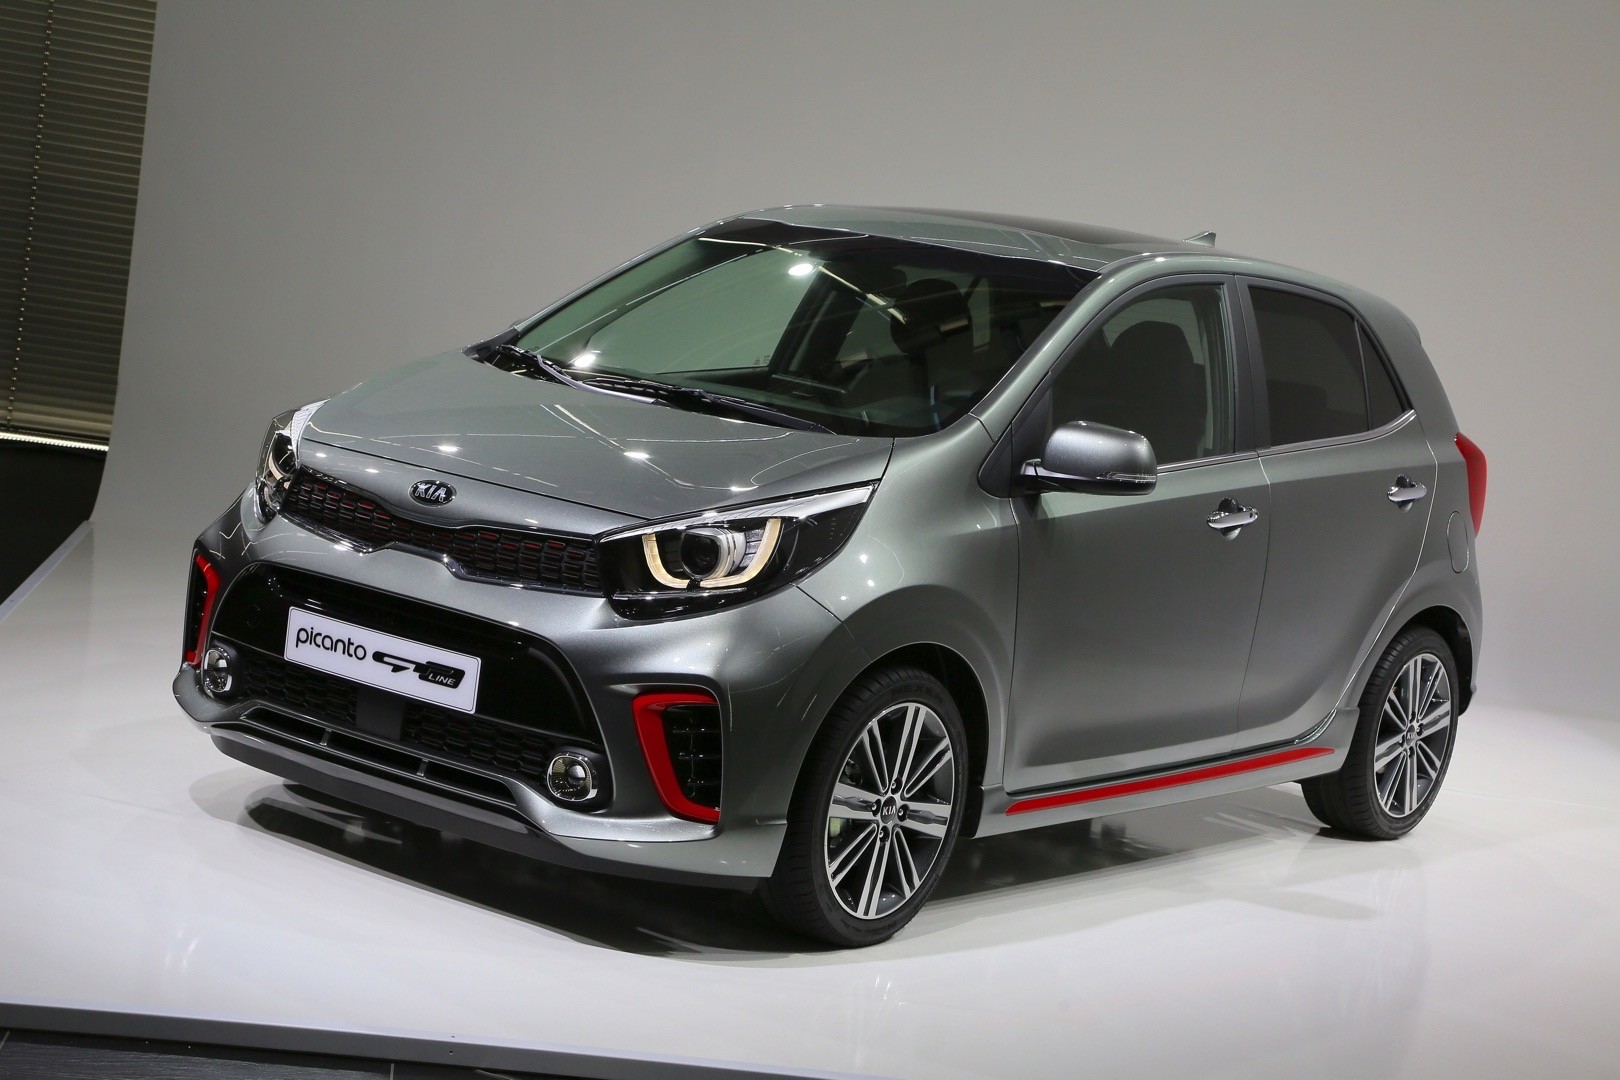 Kia Picanto Gt Line With 1 Liter Turbo Is An Up Gti Alternative Autoevolution